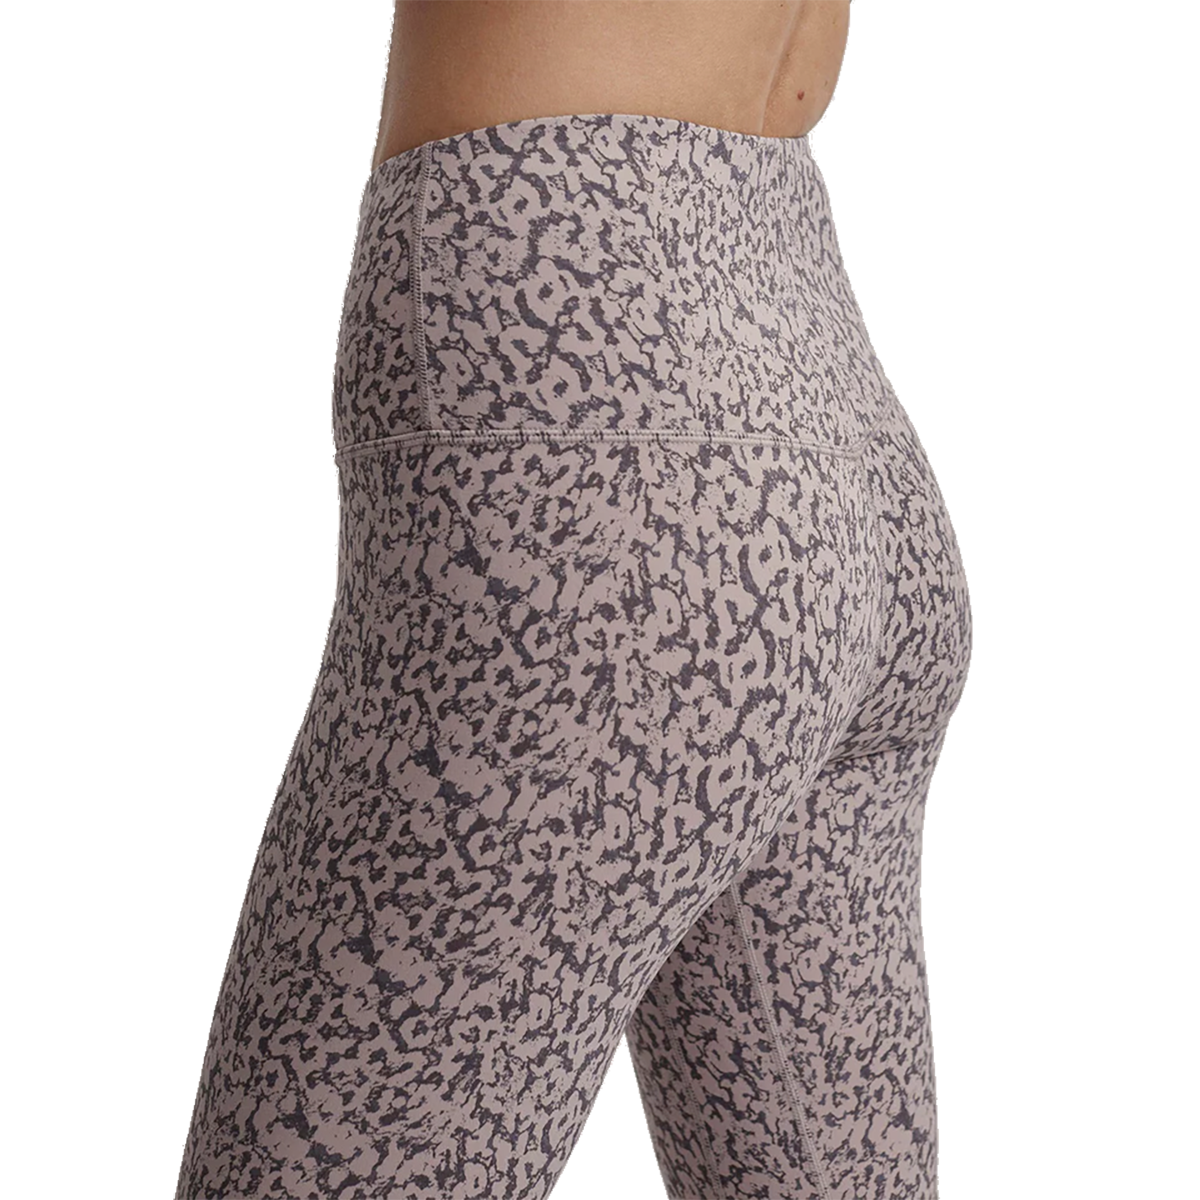 Varley Womens Marbled Leopard Print Ankle Leggings Gray Size Small